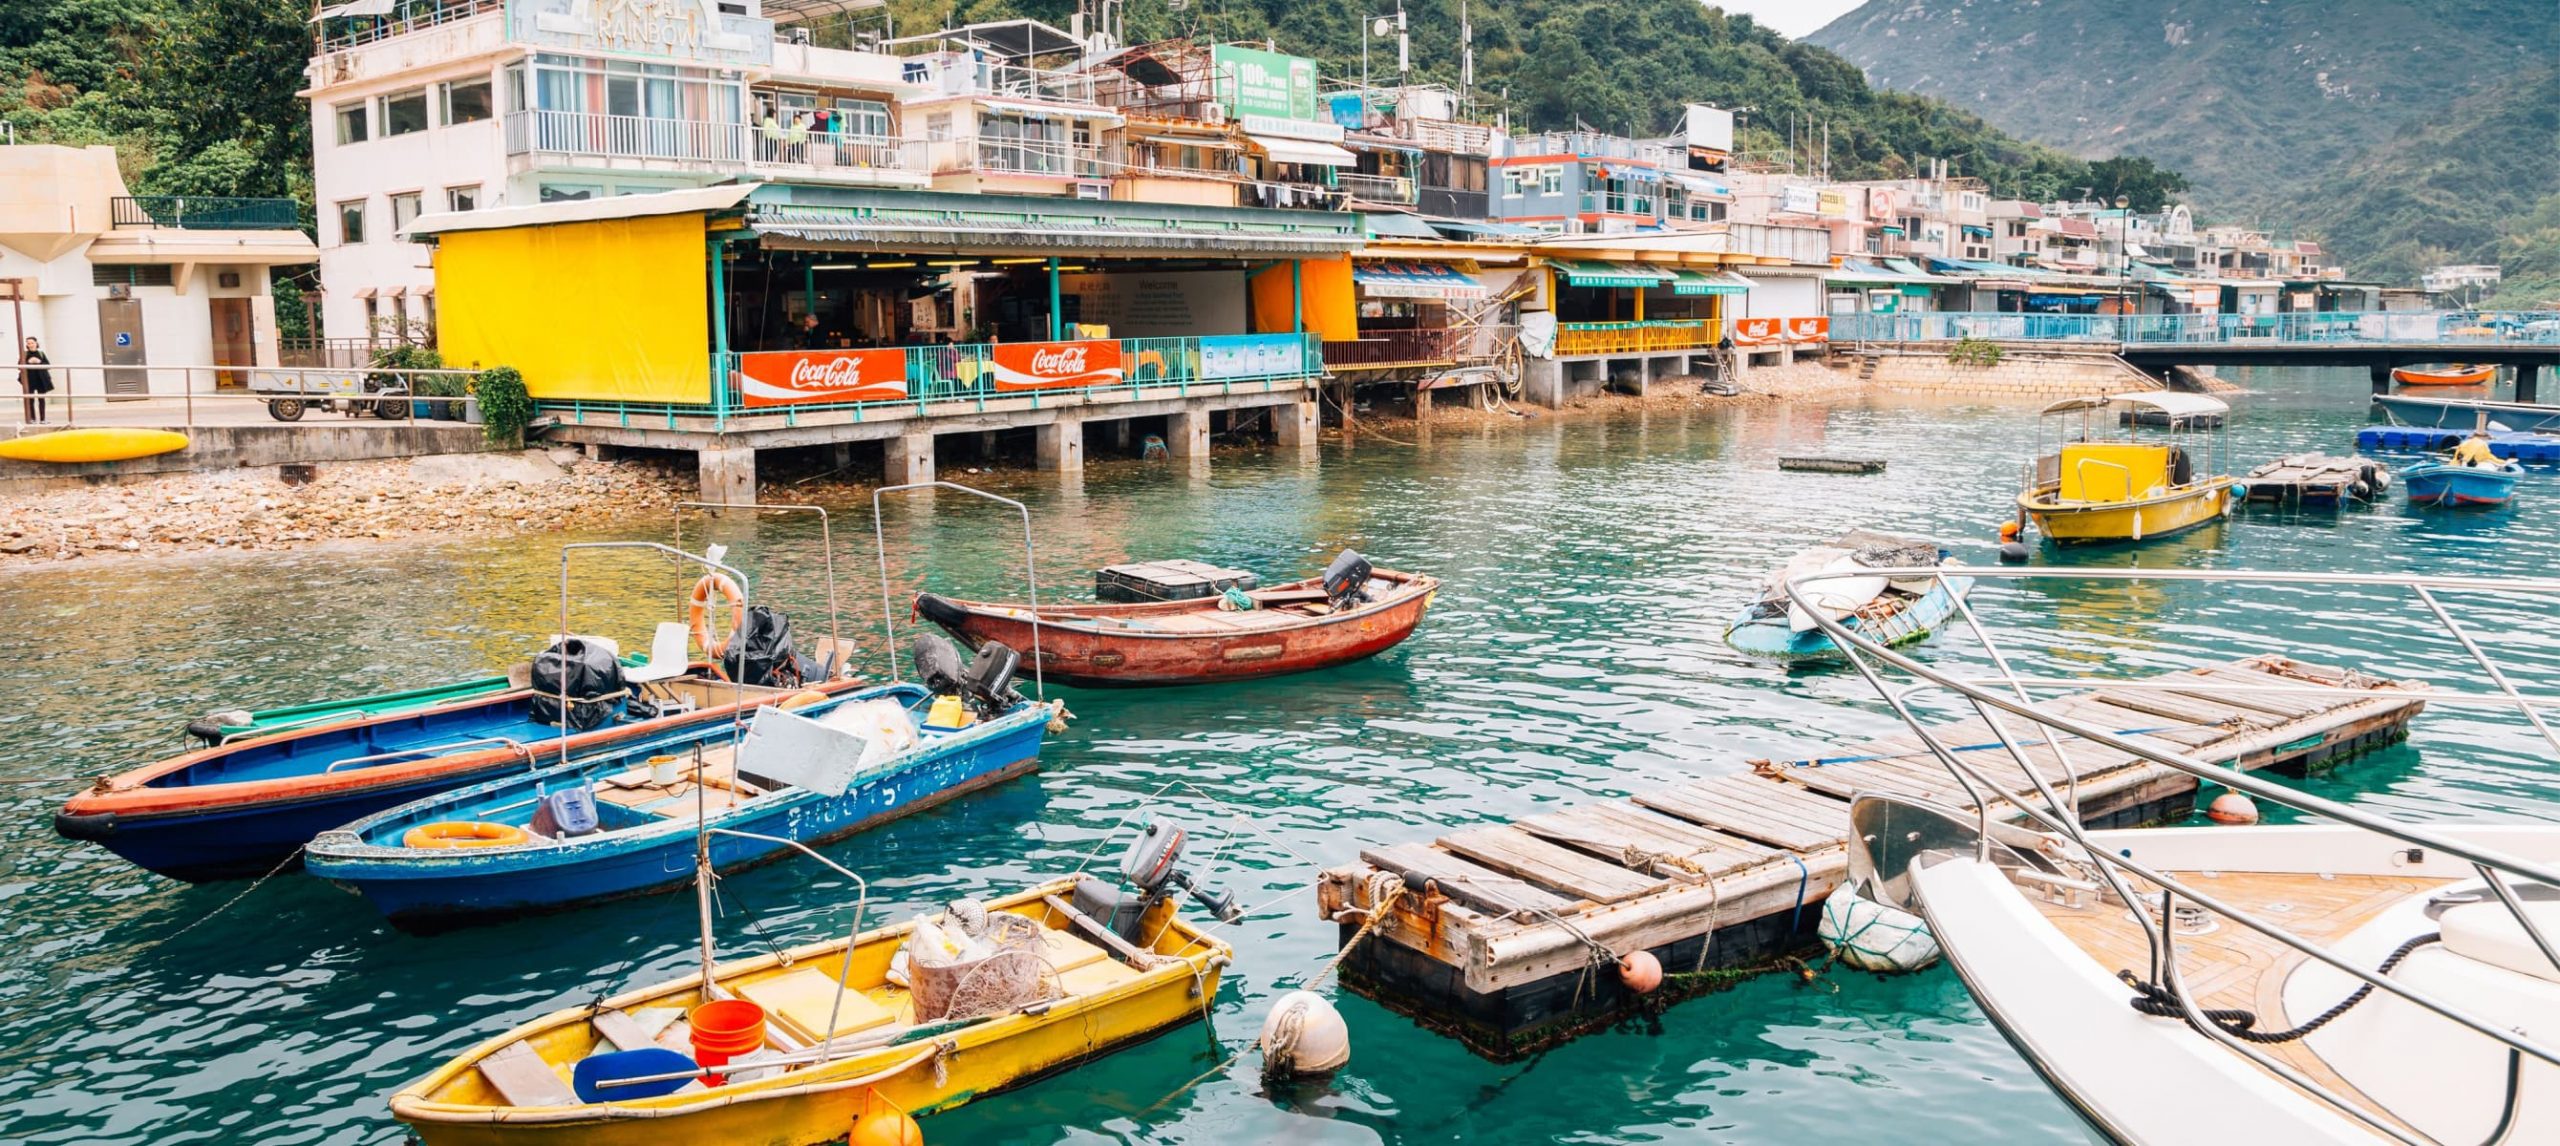 The 5 Best Day Trips From Hong Kong